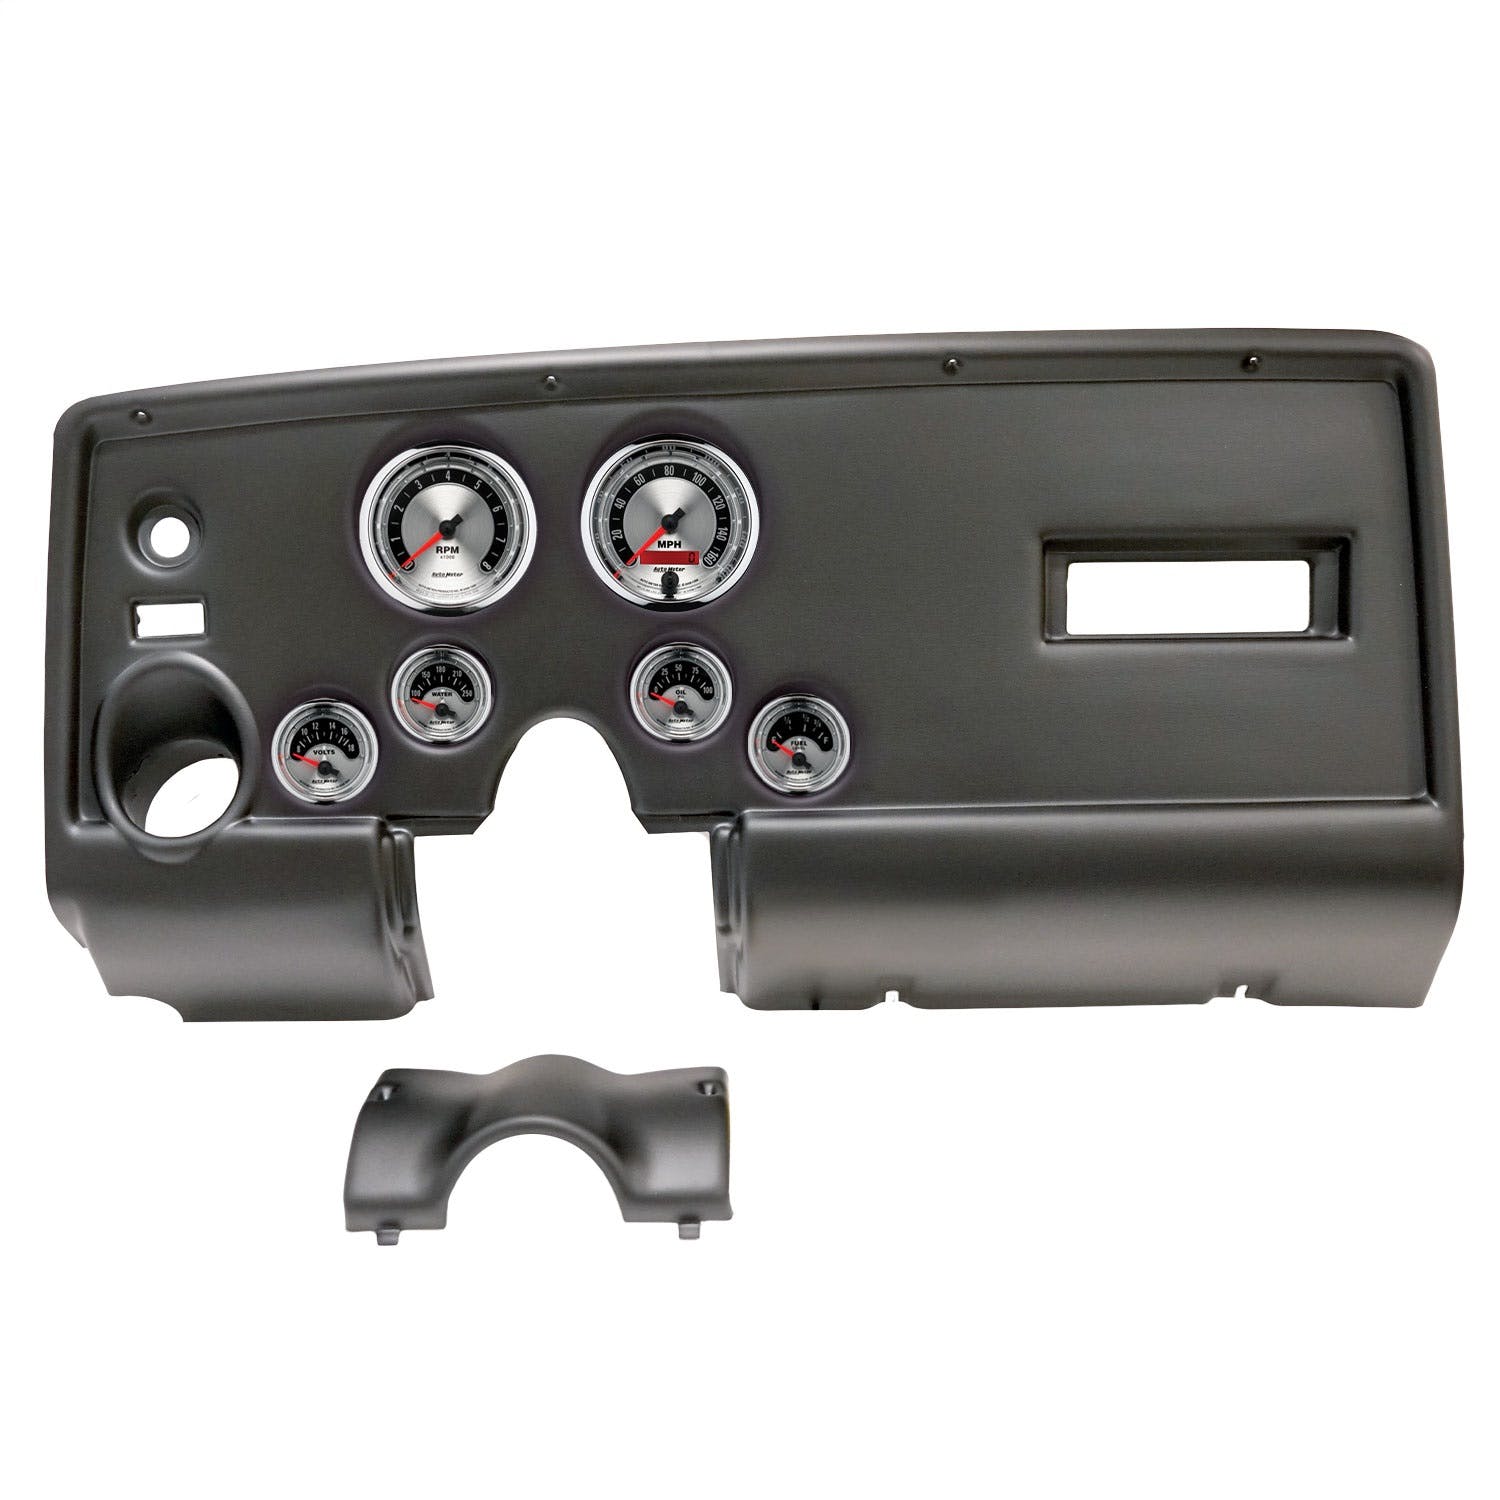 AutoMeter Products 2912-01 6 Gauge Direct-Fit Dash Kit, Pontiac Firebird 69, American Muscle